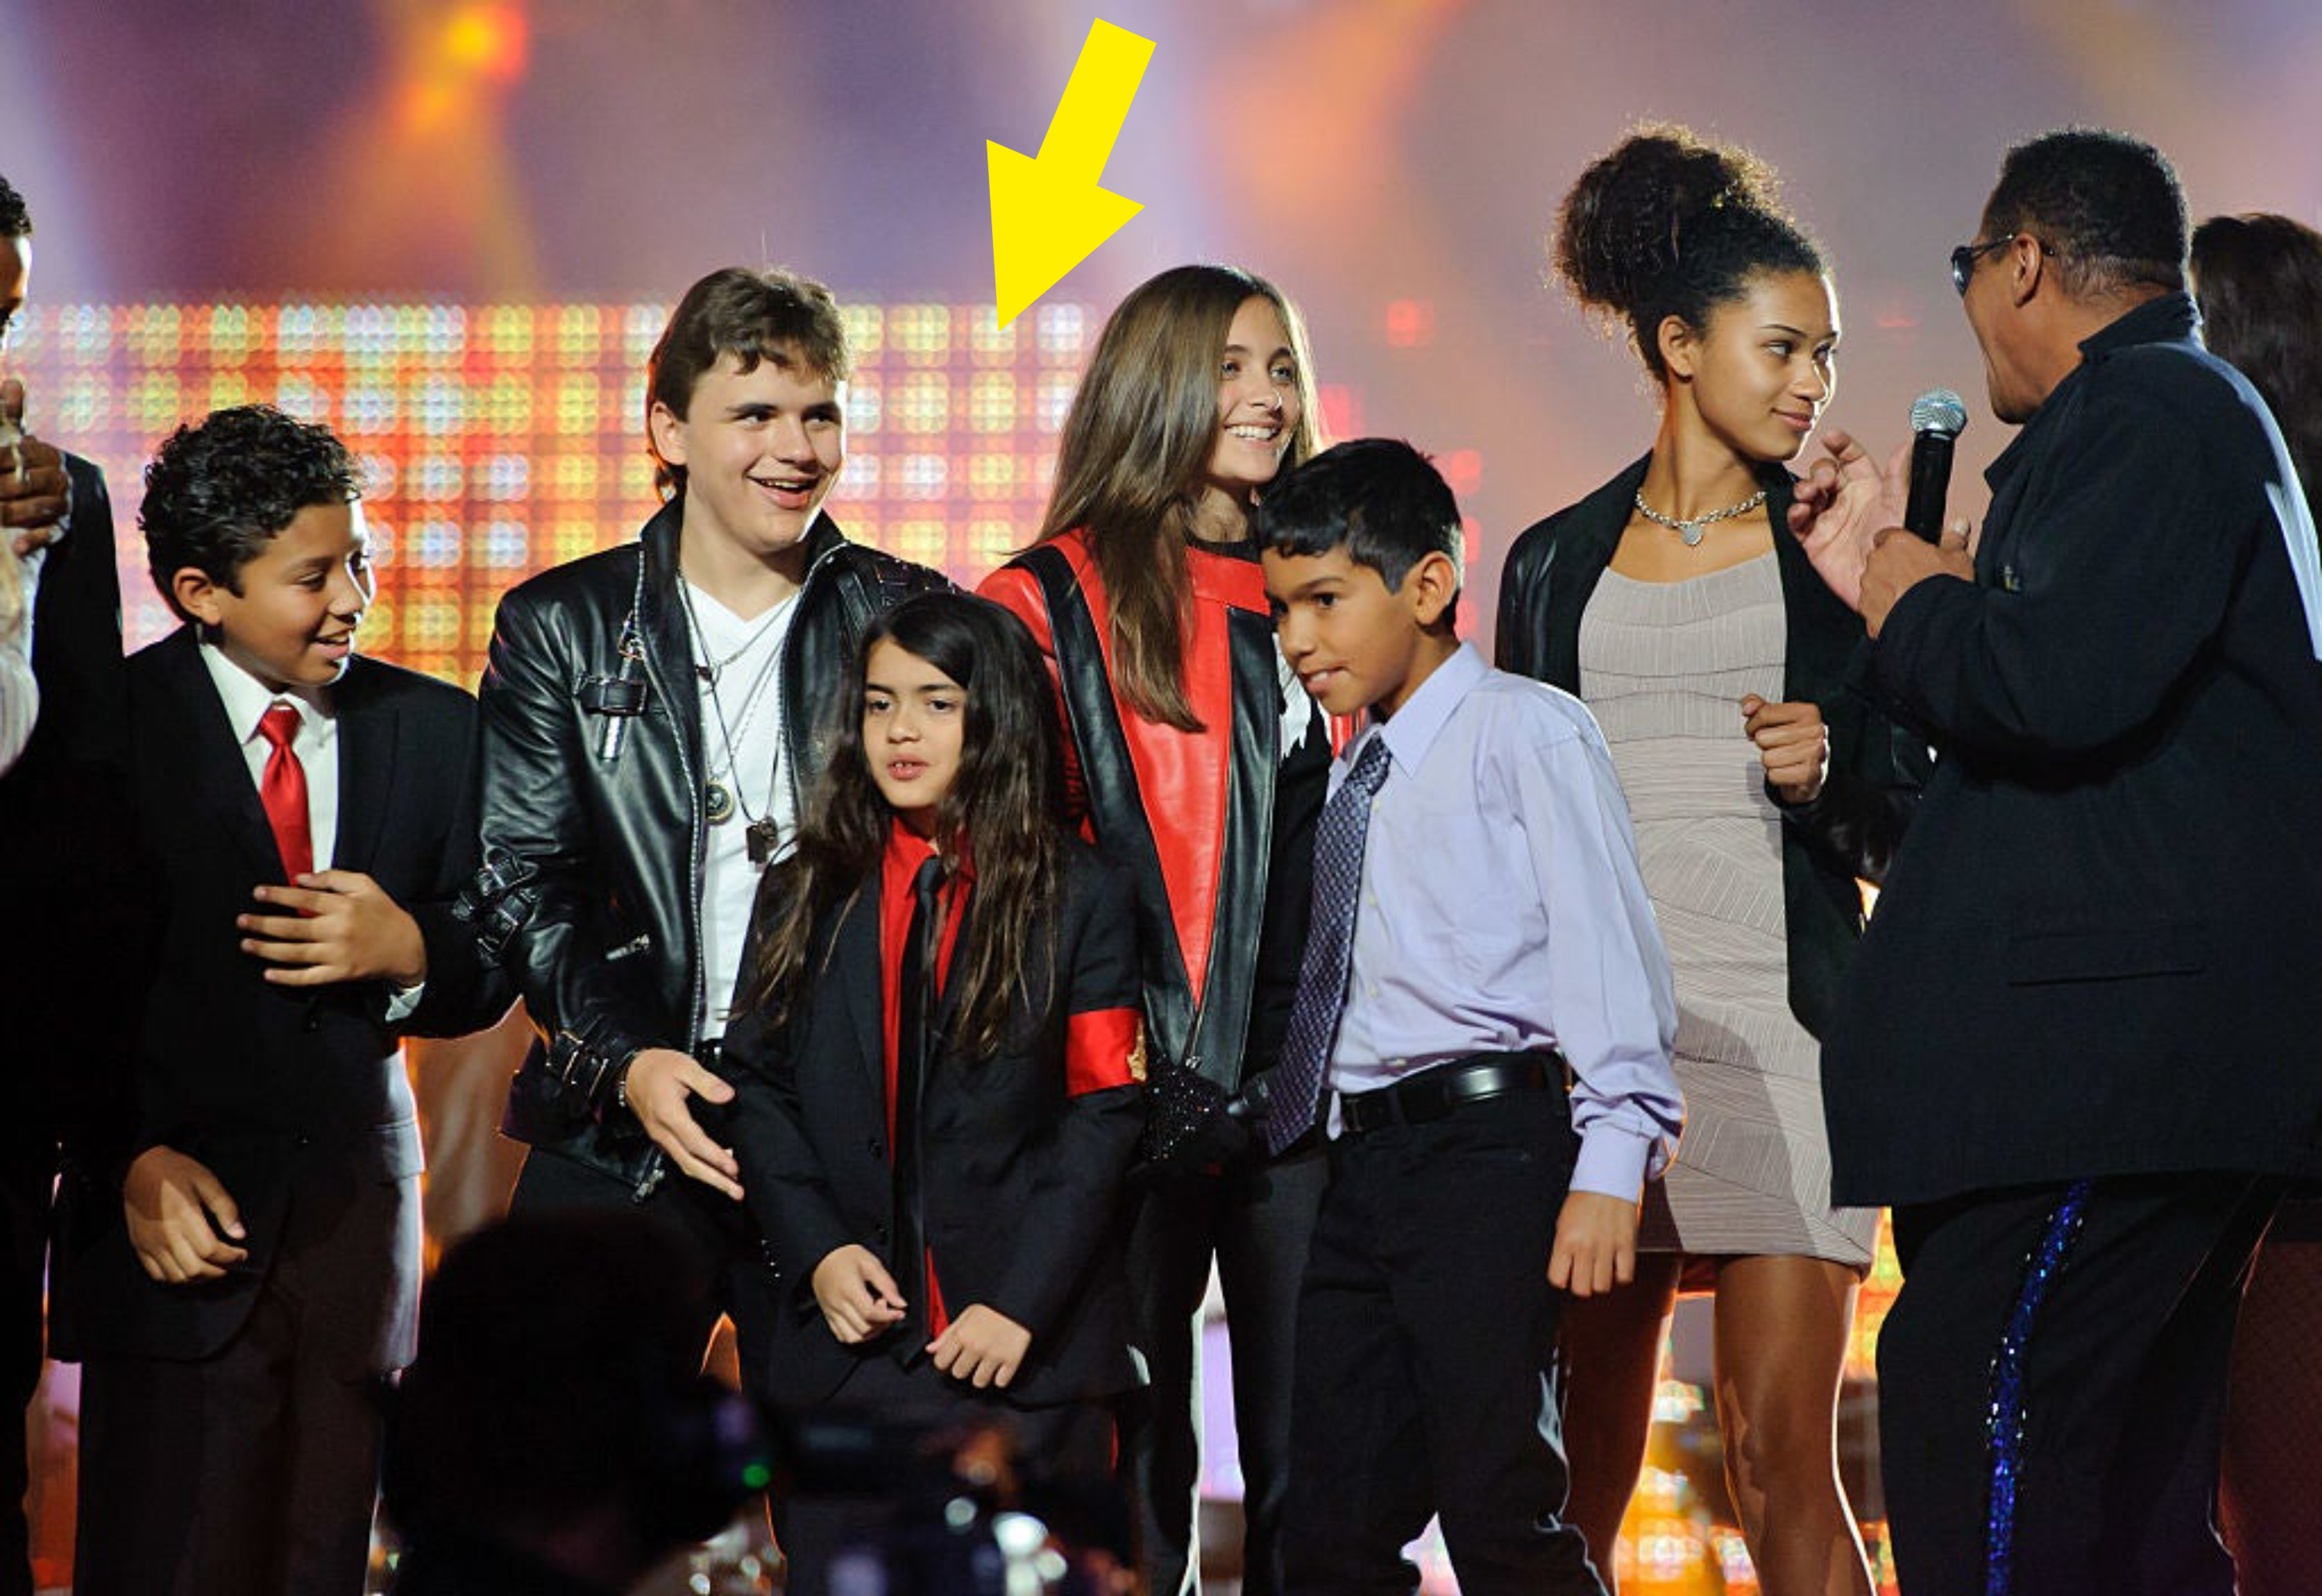 Group of smiling children on stage with a man holding a microphone speaking to them